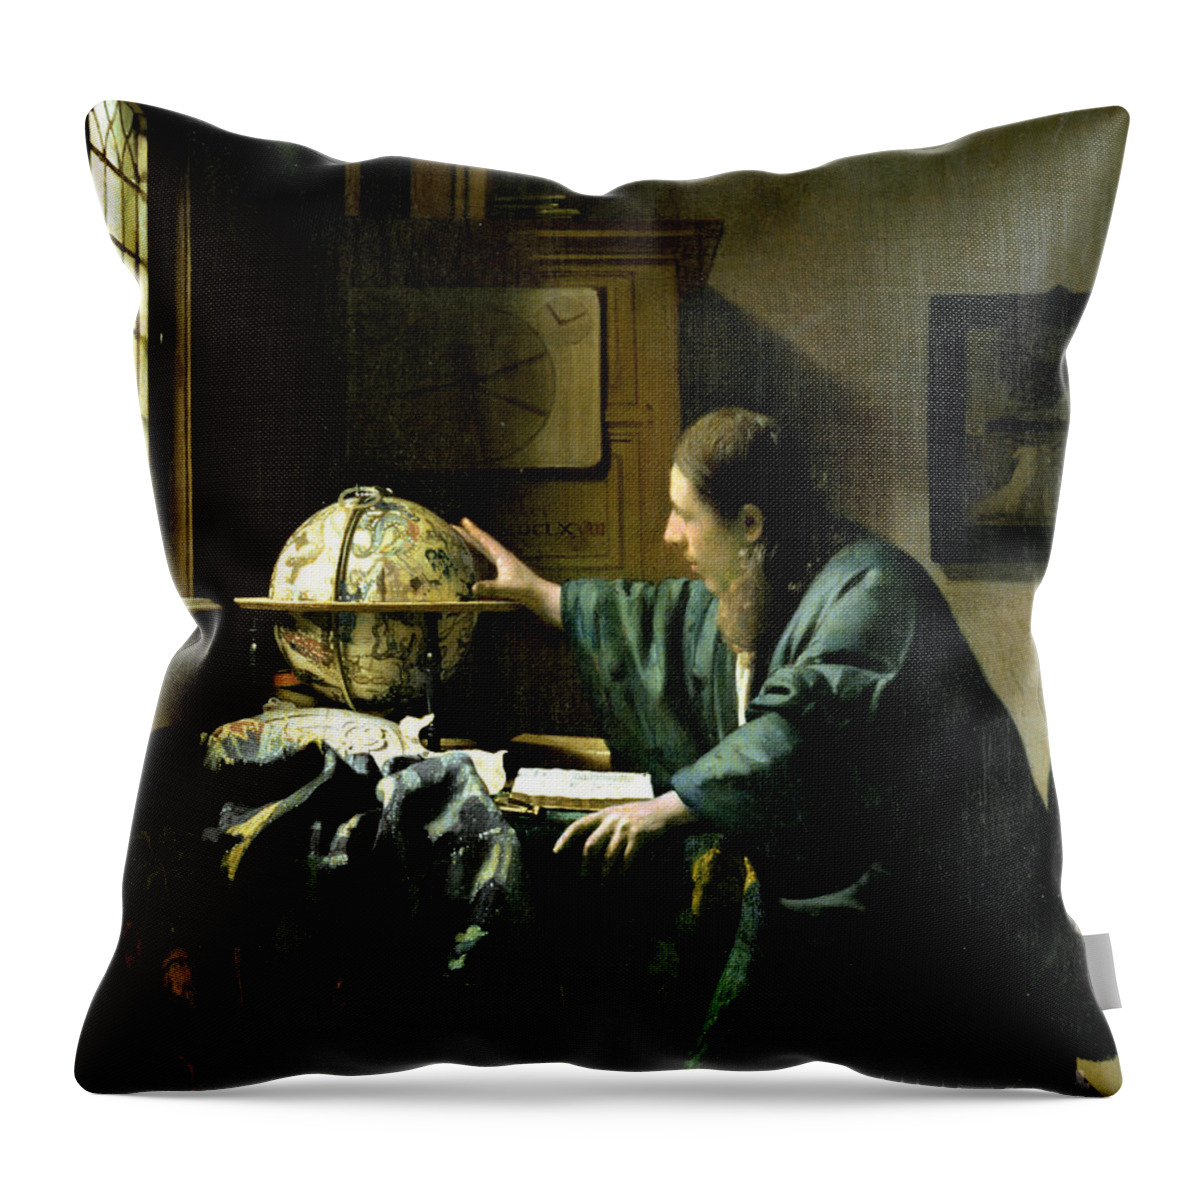 Jan Vermeer Throw Pillow featuring the painting The Astronomer by Jan Vermeer